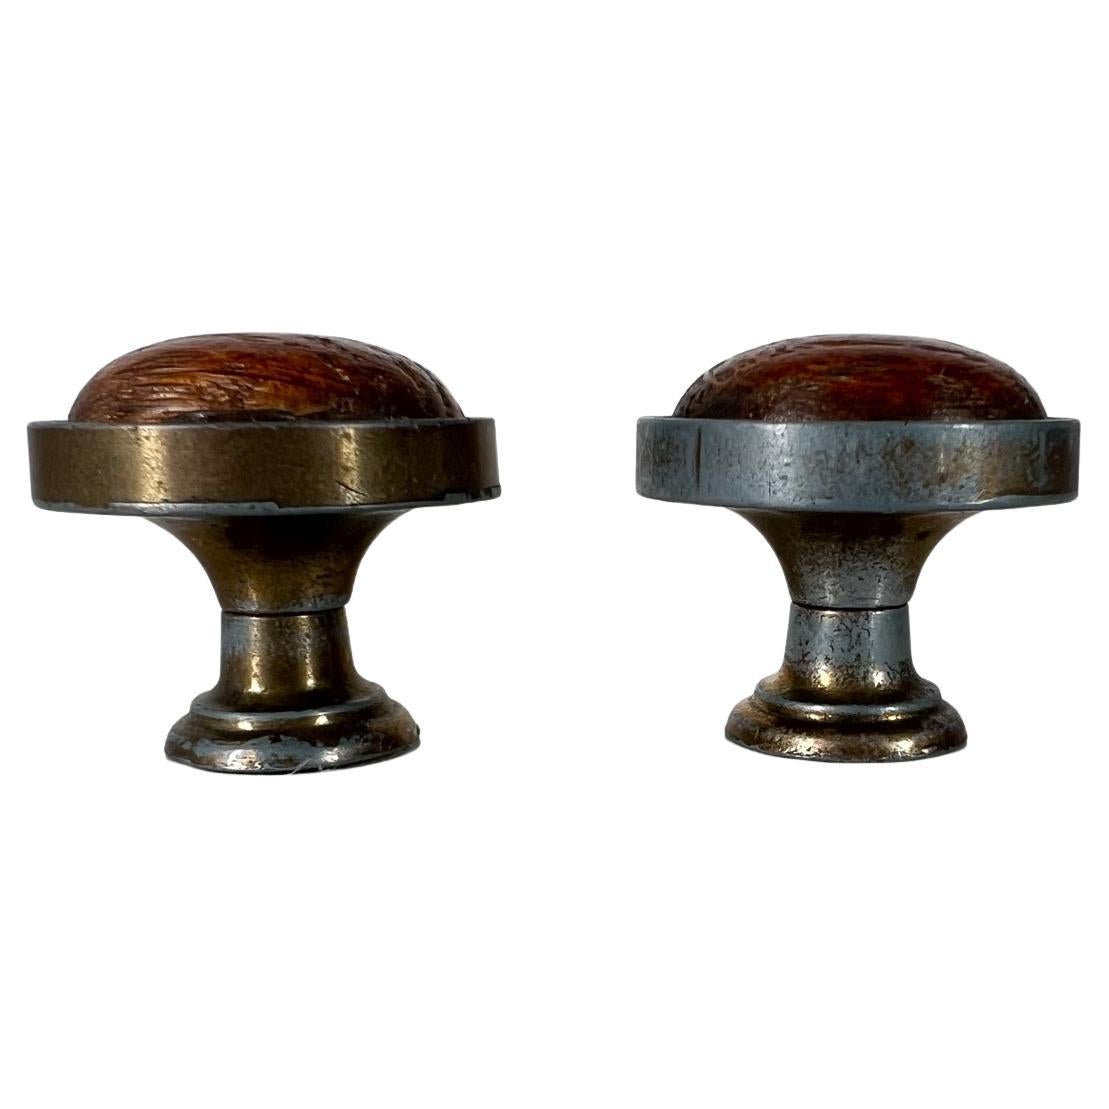 Vintage Hardware Drawer Pulls Brass Knobs with Wood Insert Set of 2 Canada